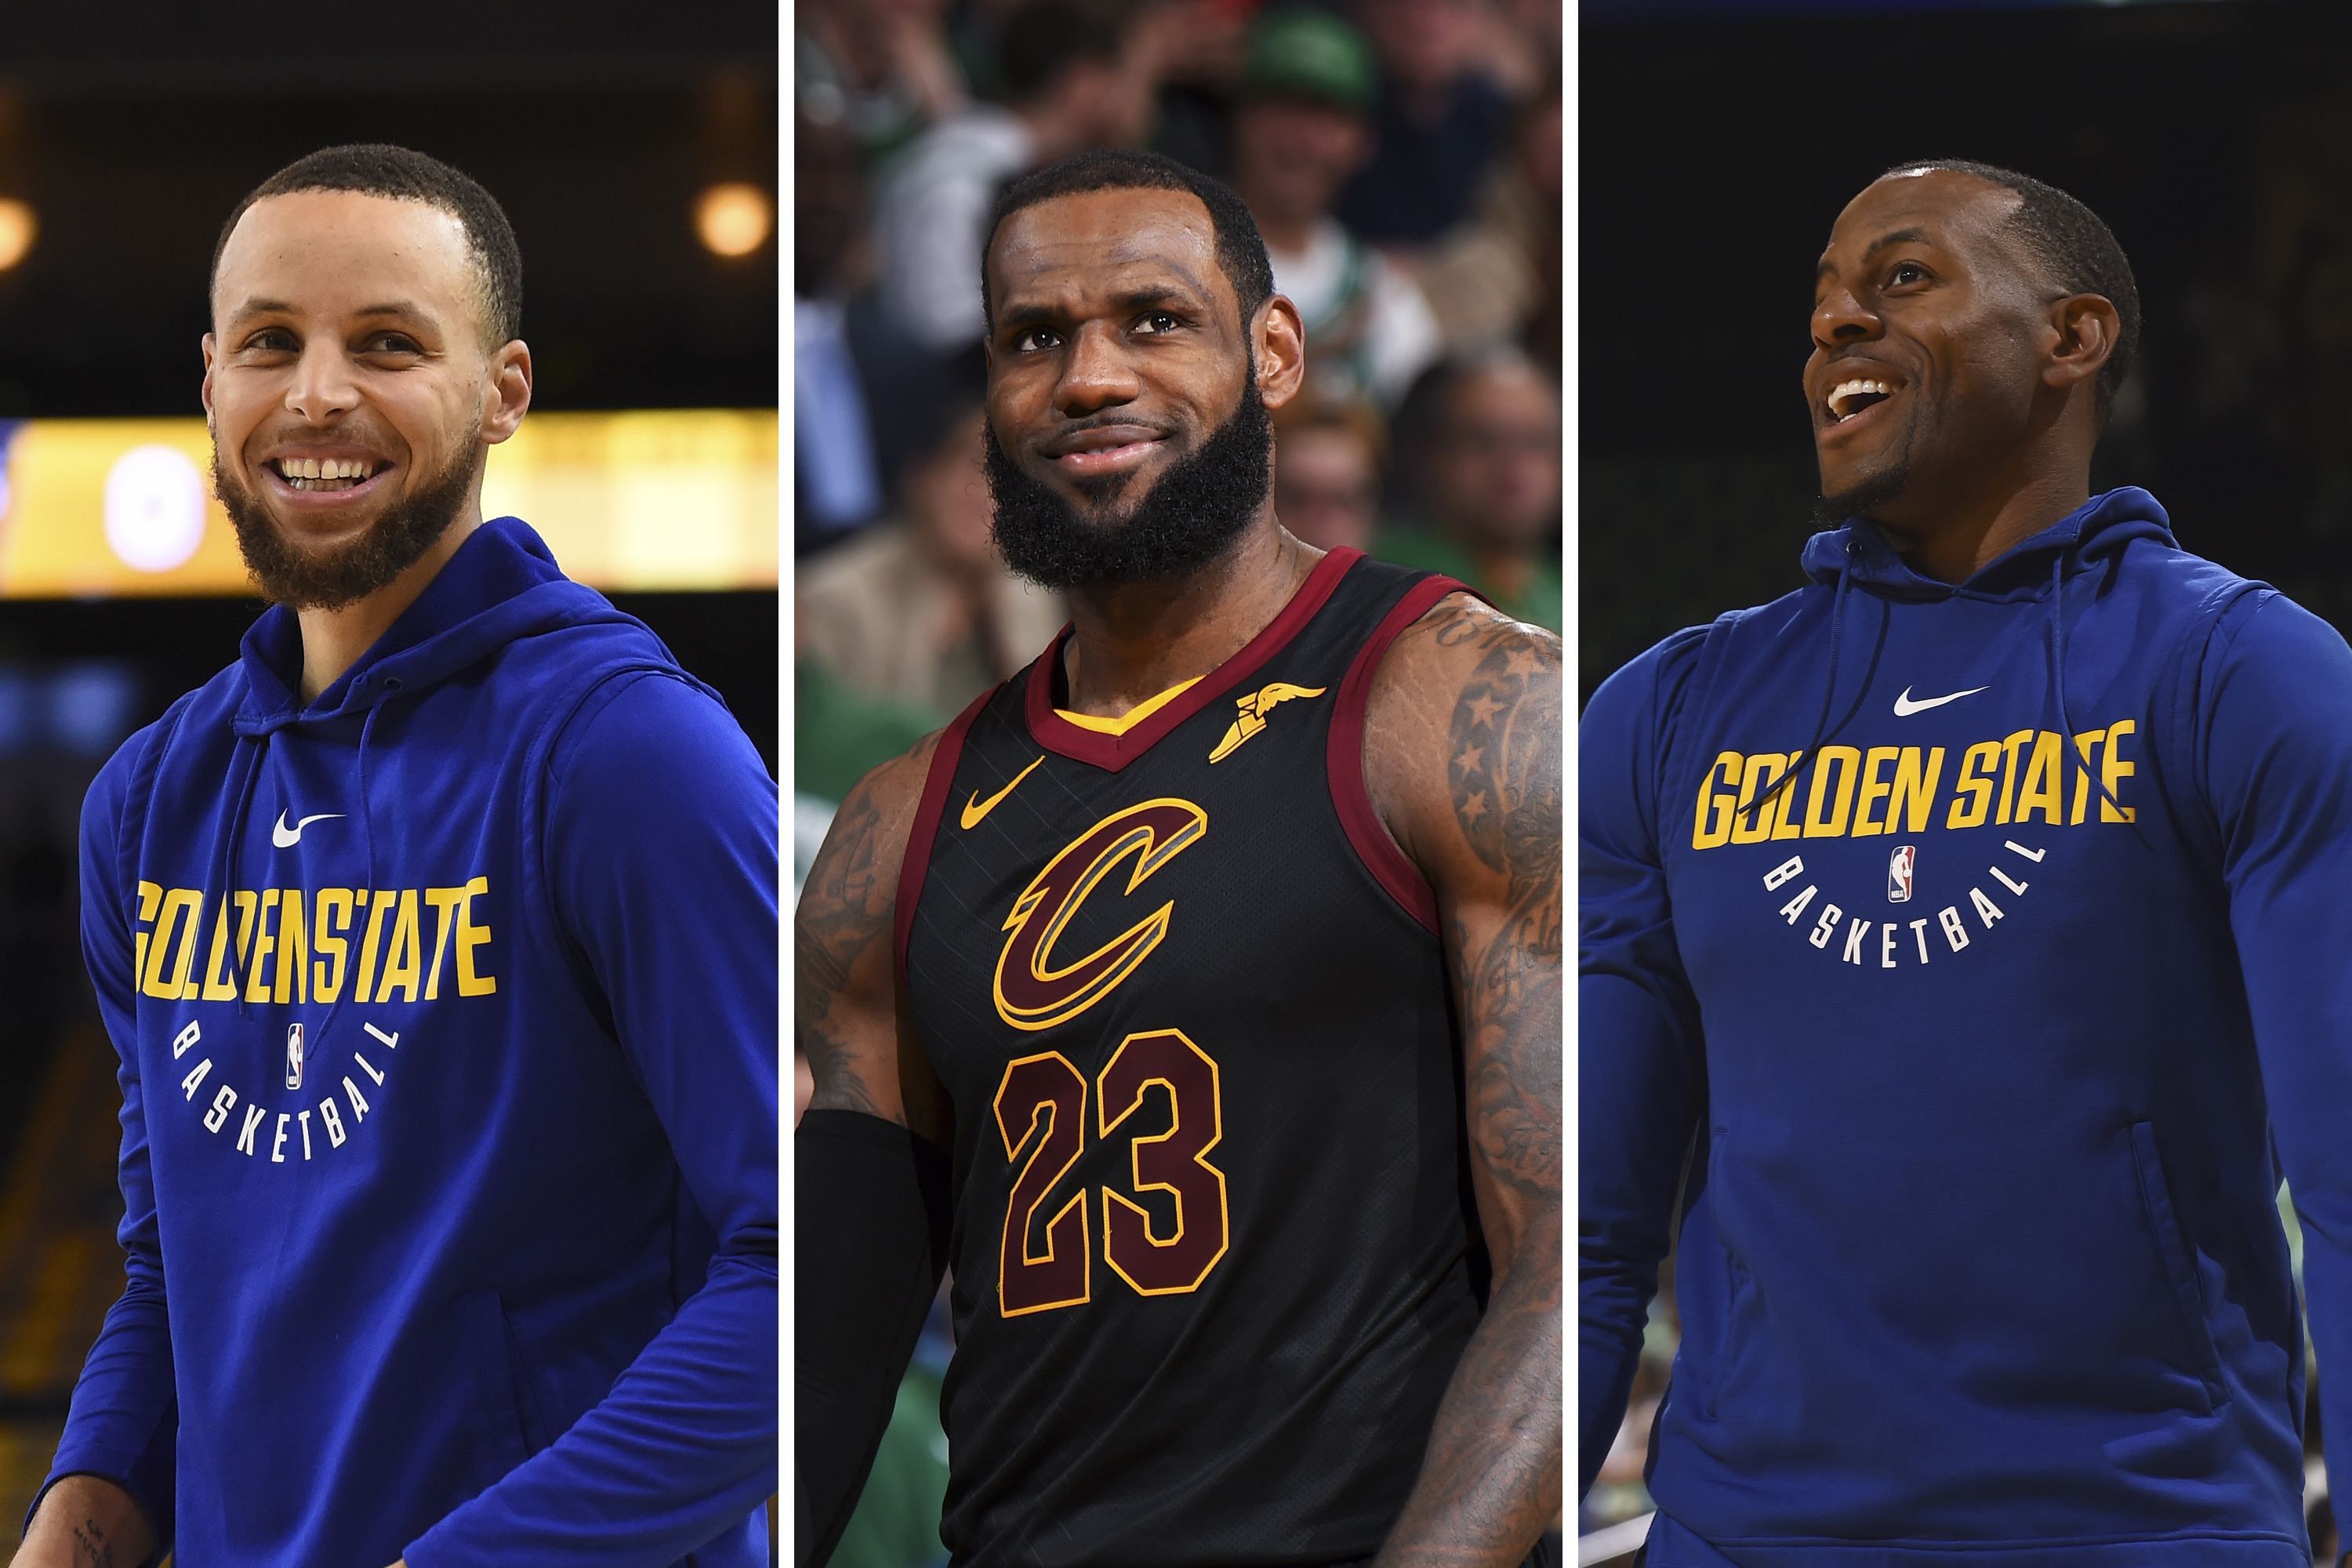 These Are the Richest Investors Playing In the 2018 NBA Finals